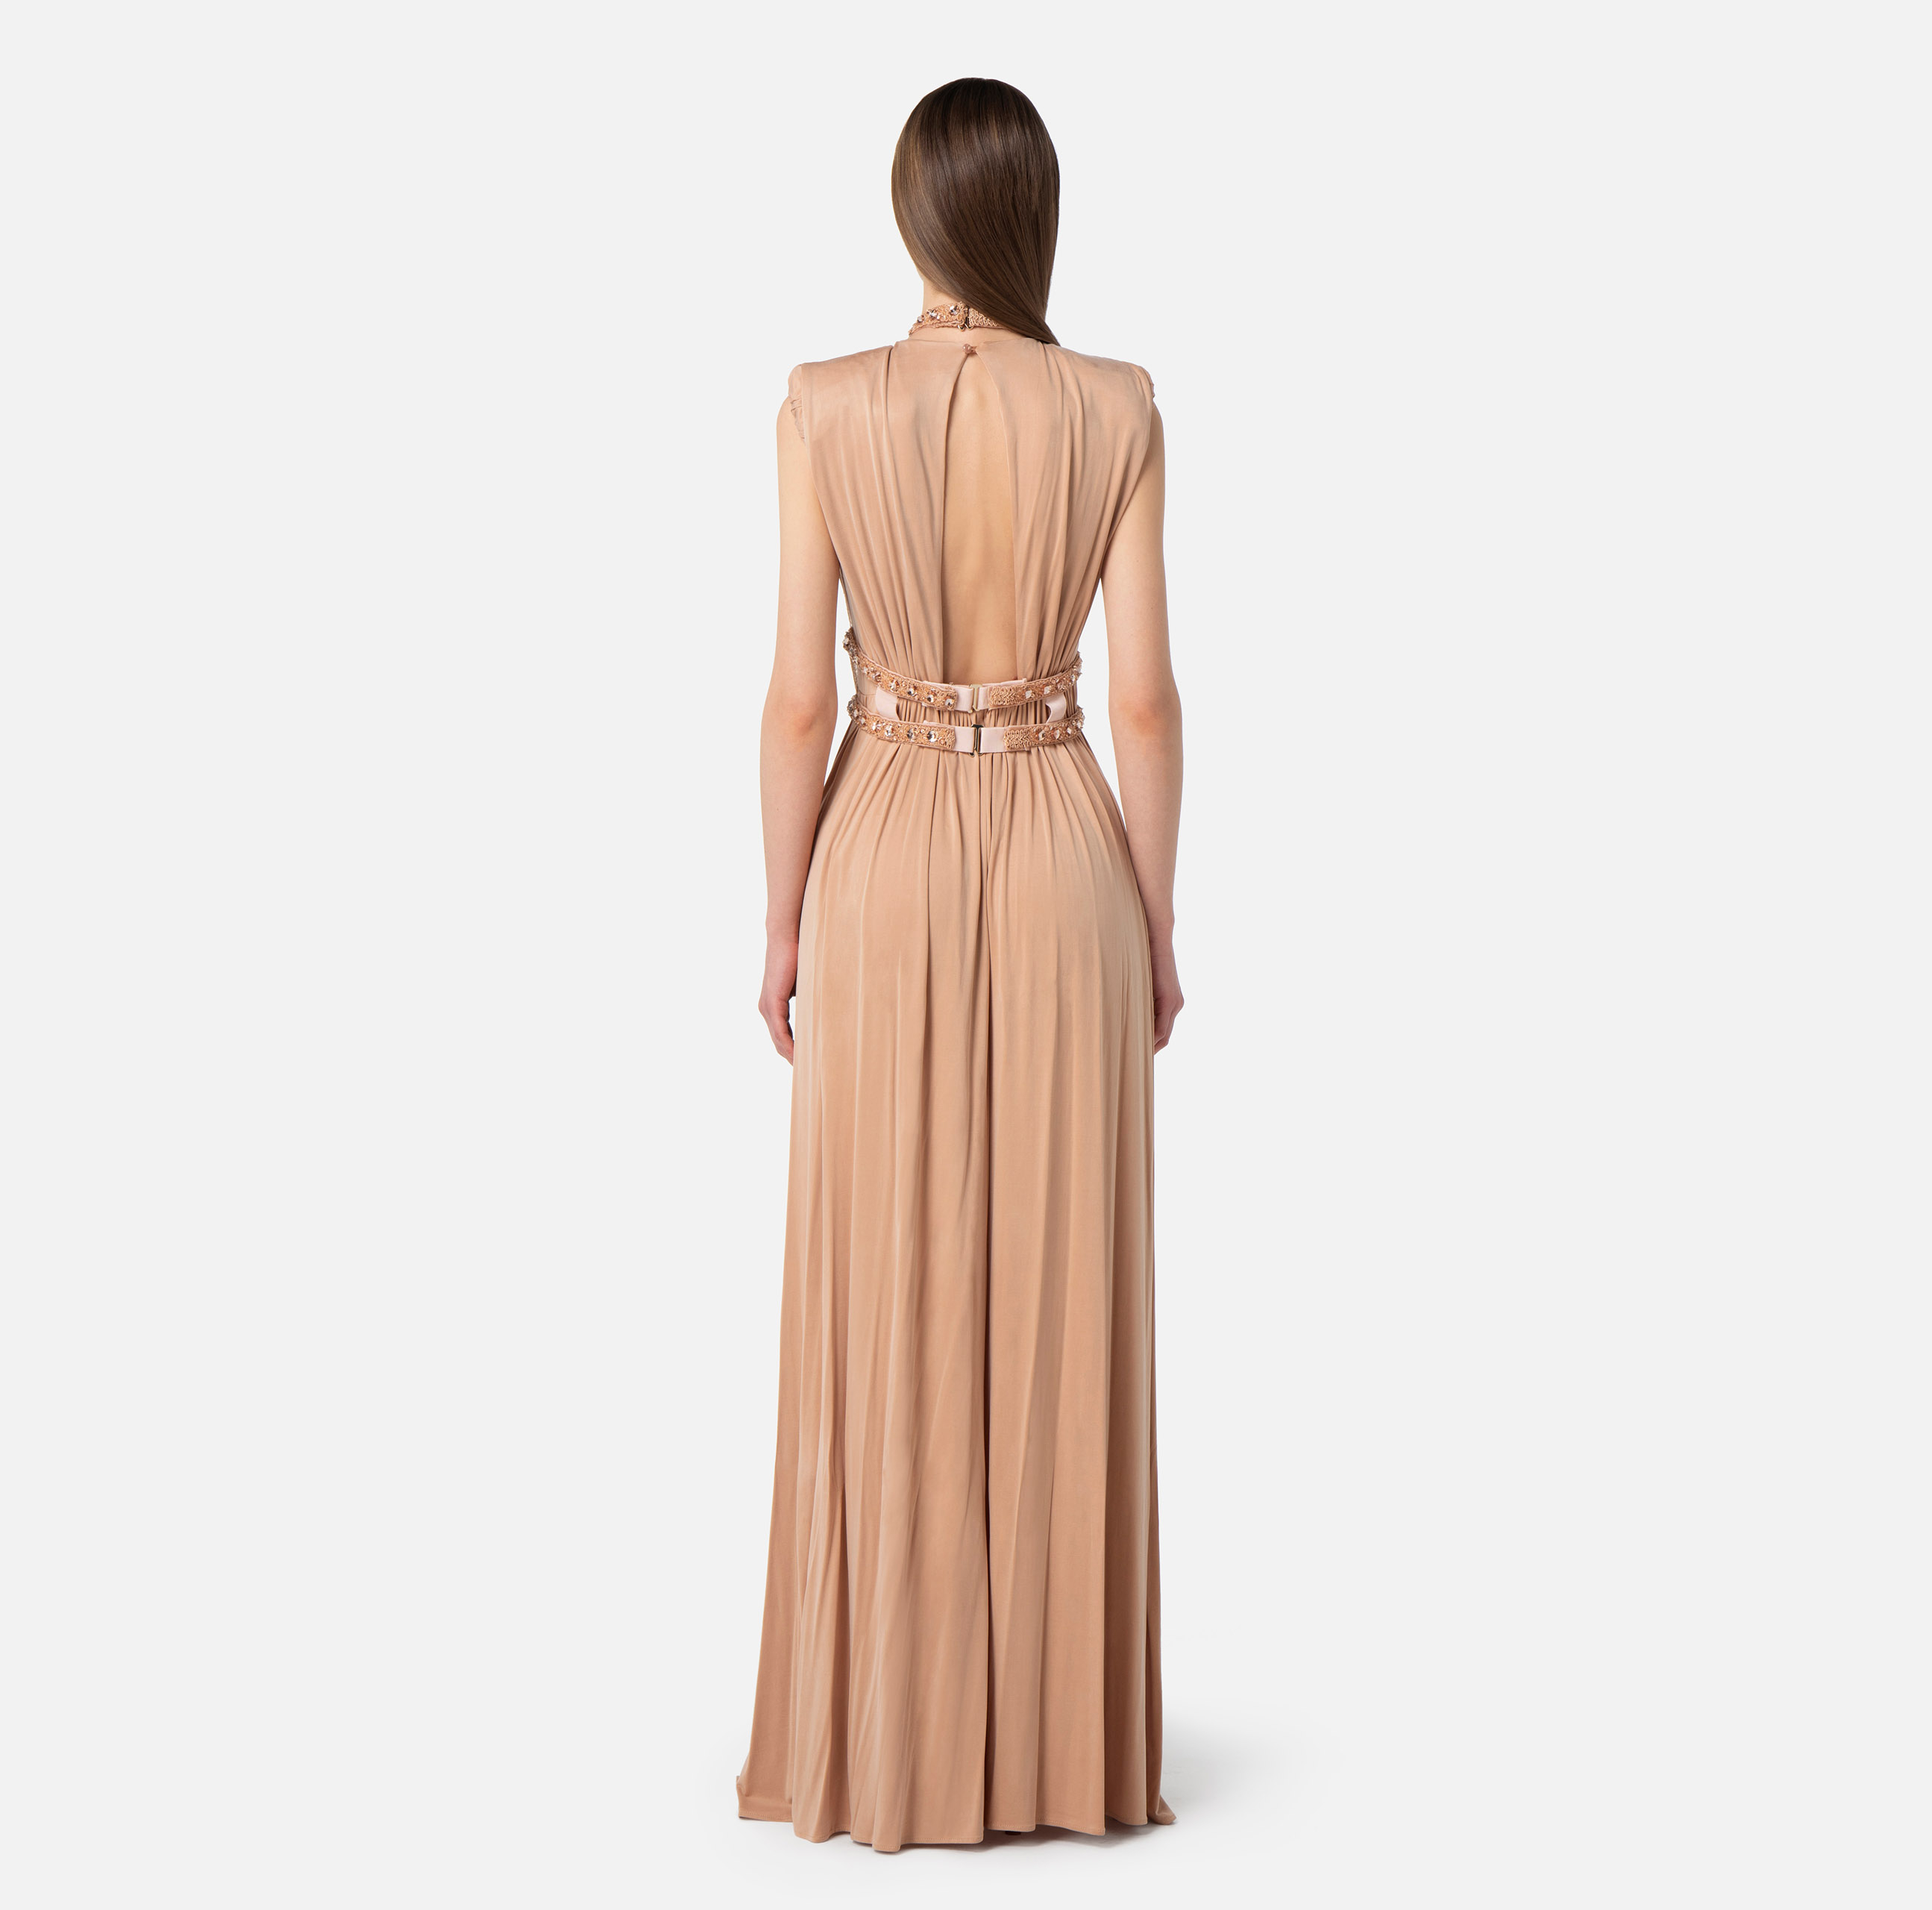 Red Carpet dress in cupro jersey with necklace - Elisabetta Franchi